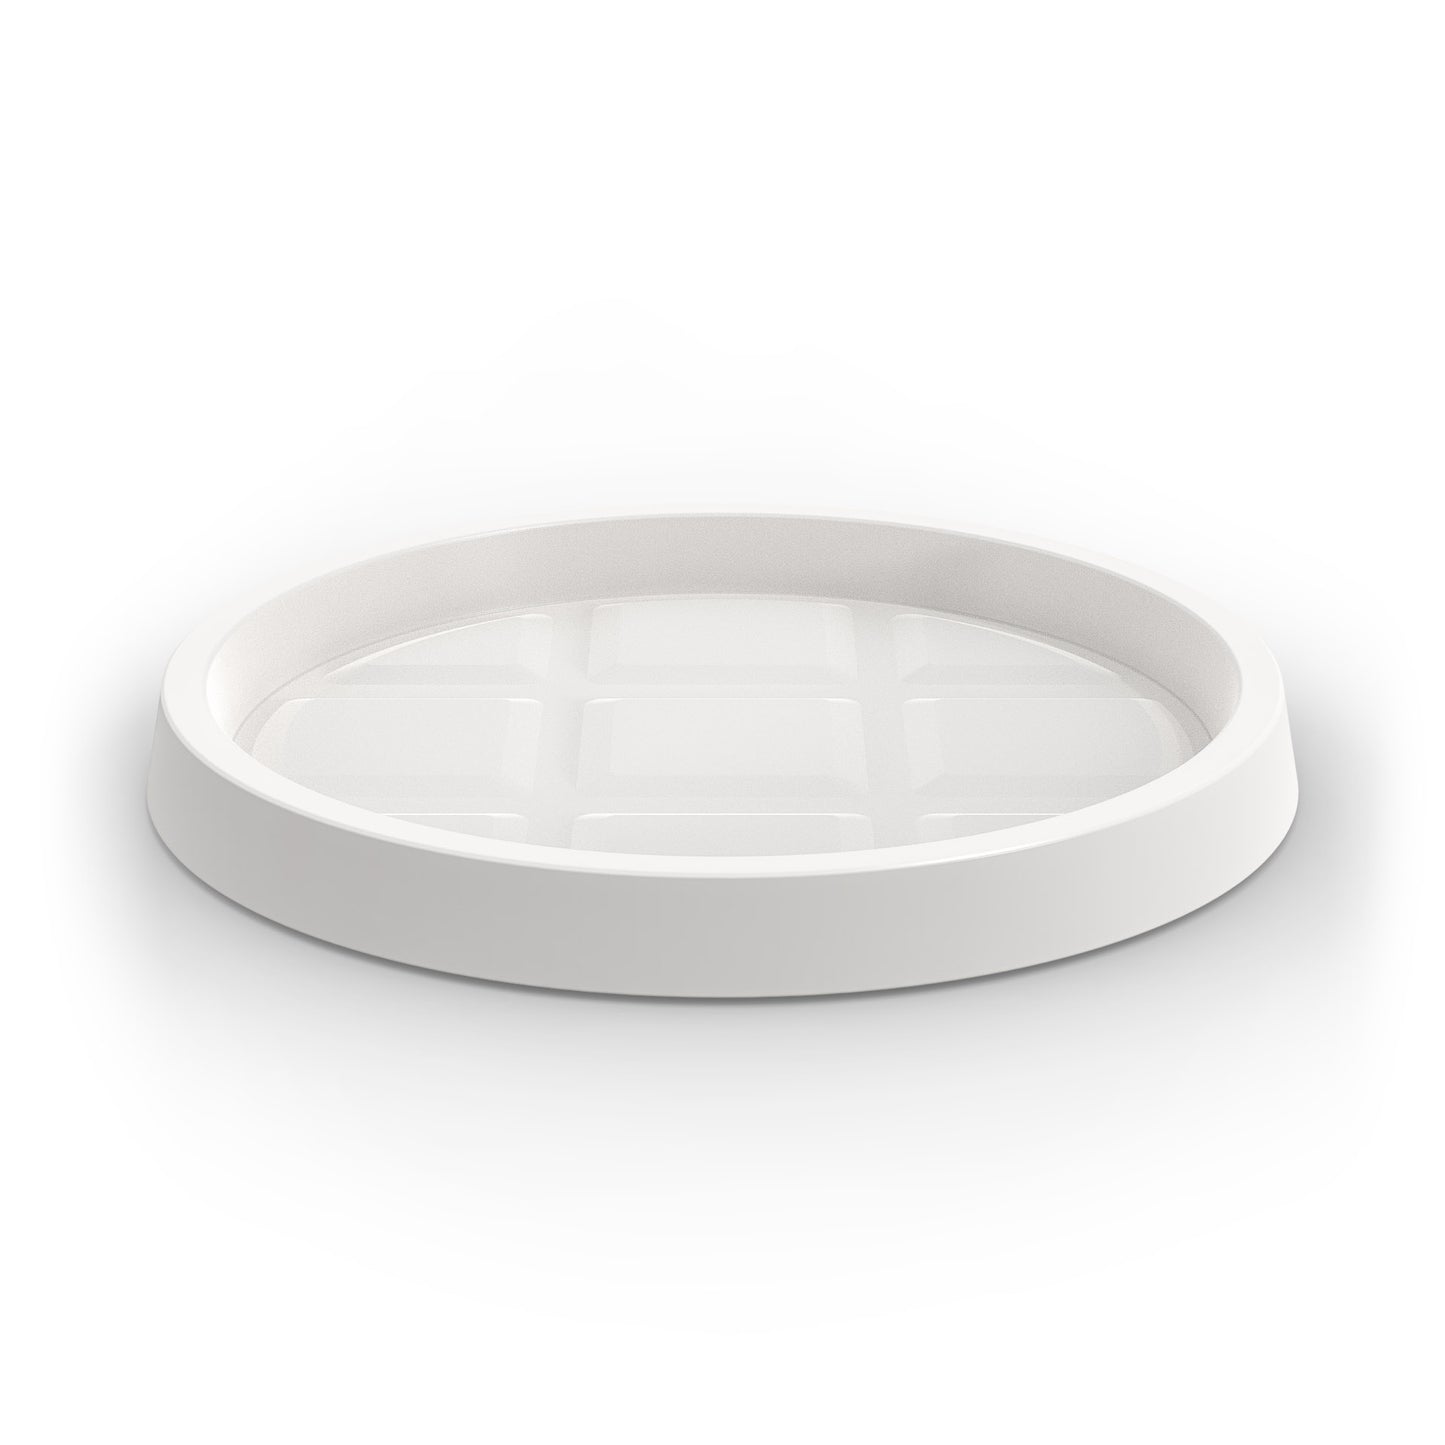 A white saucer for Modscene planters pots. New Zealand made.